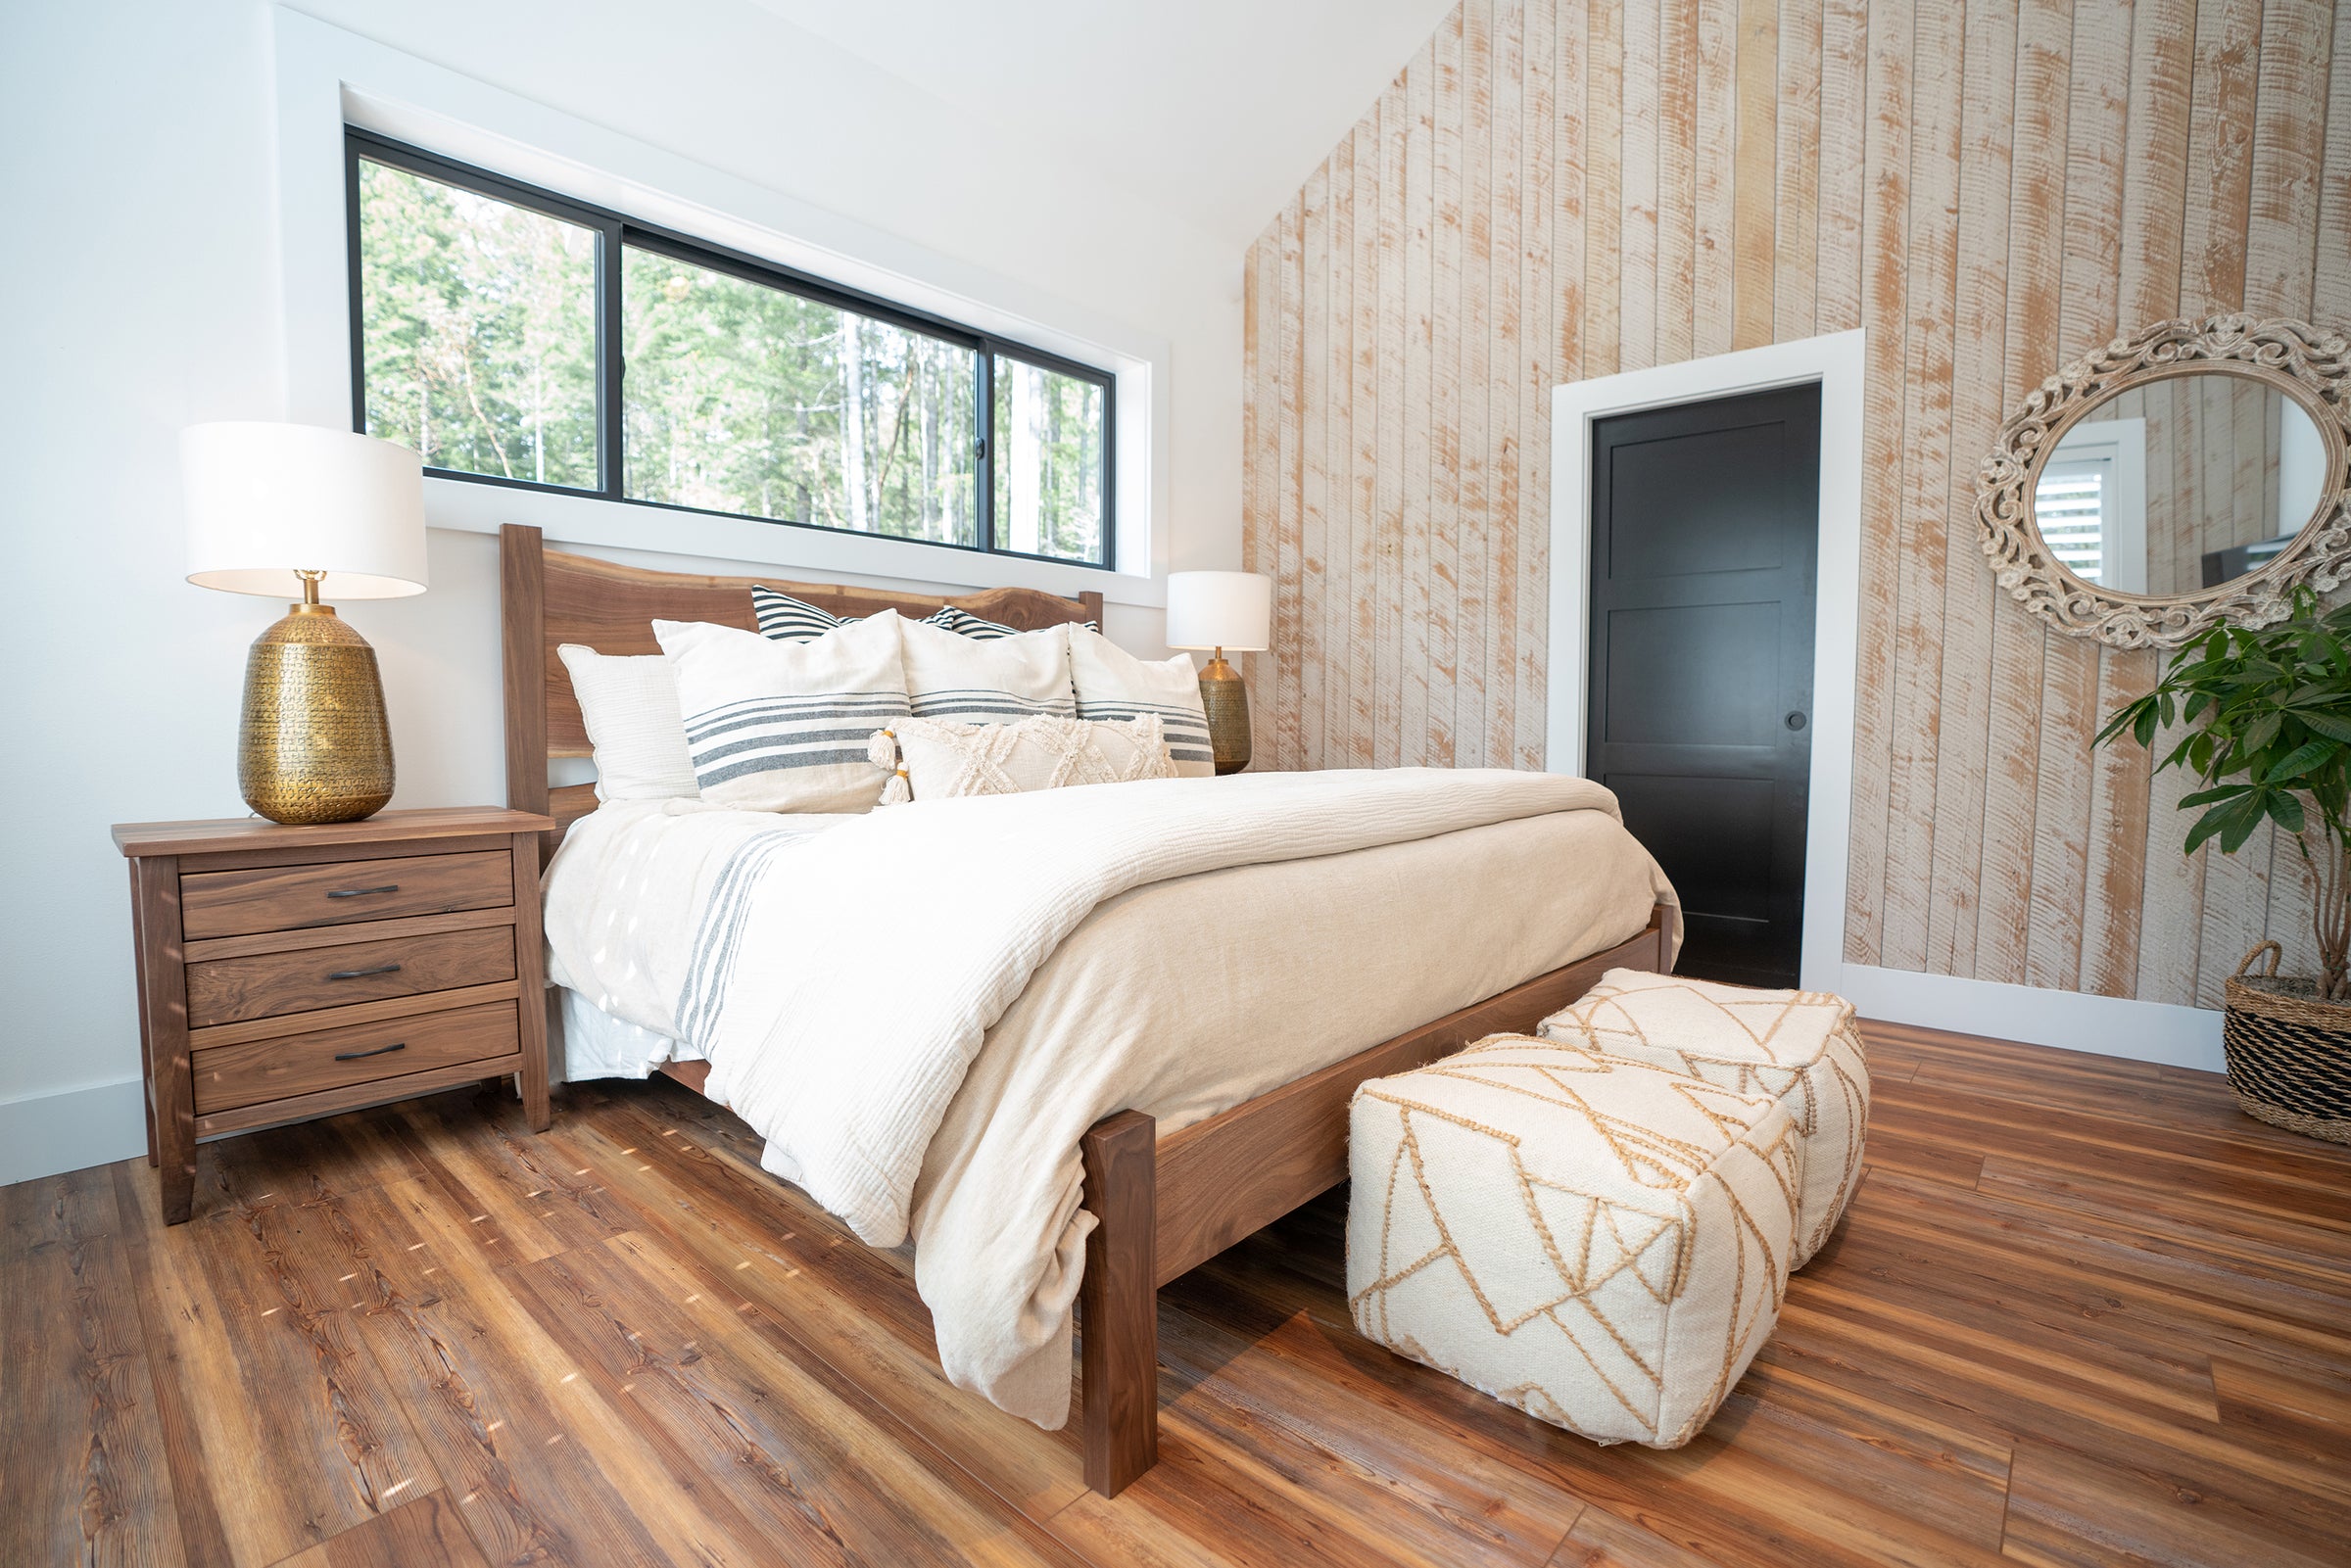 Casual, rustic bedroom scene with a large wood bed and matching nightstand.